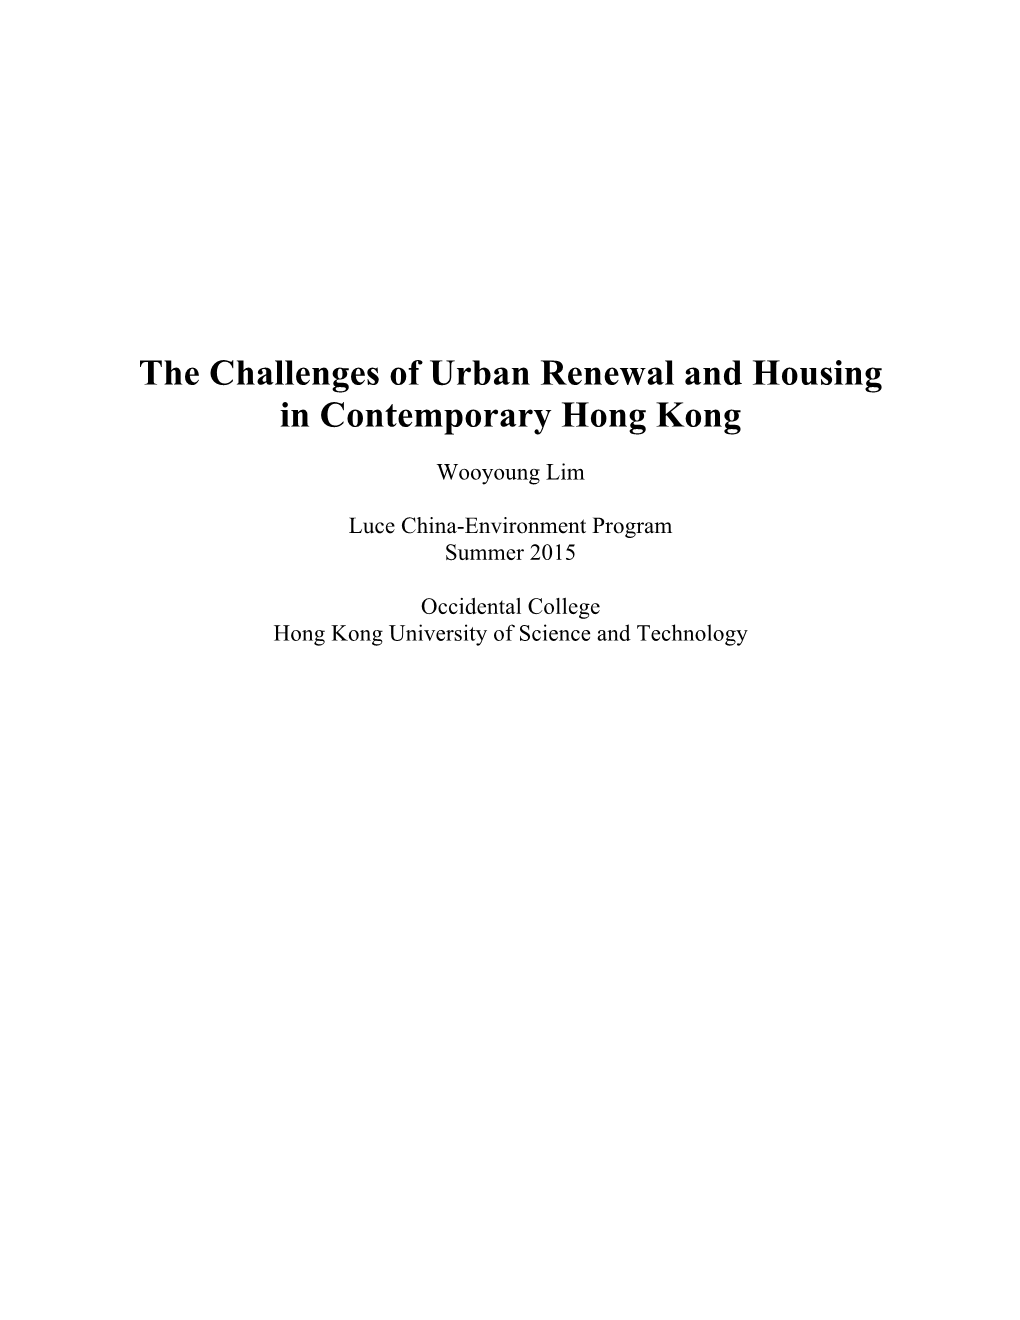 The Challenges of Urban Renewal and Housing in Contemporary Hong Kong